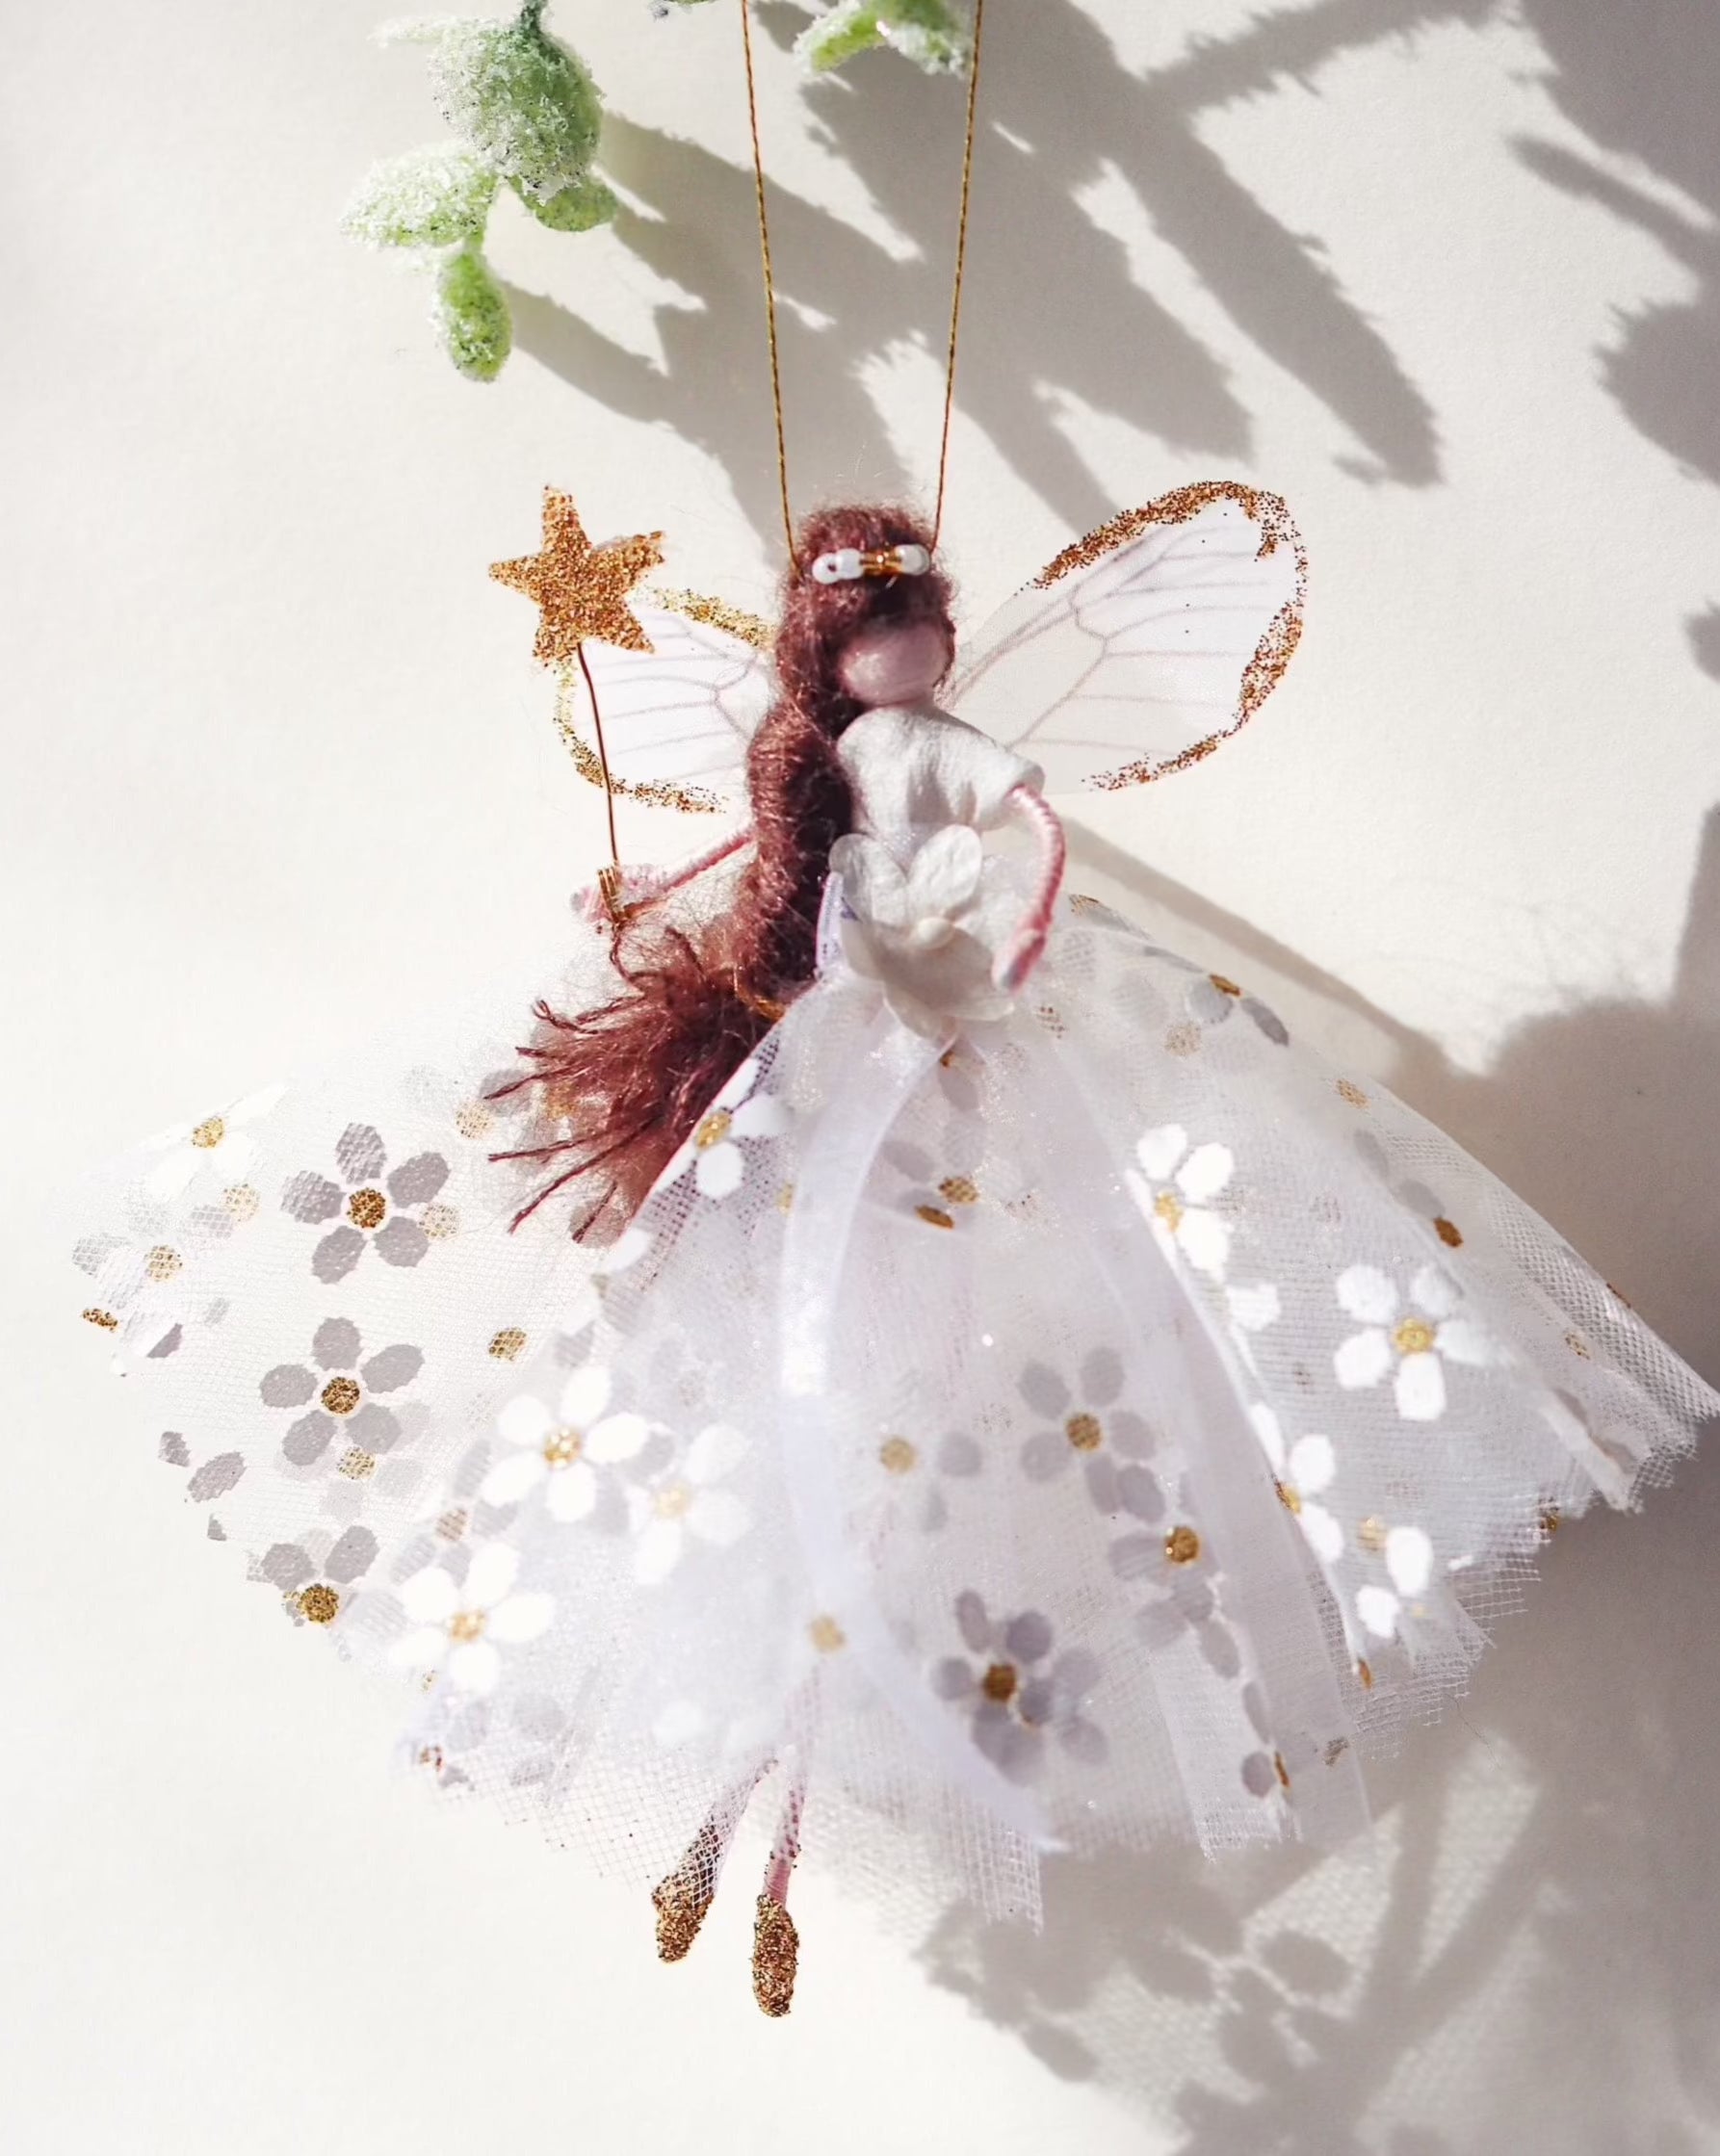 ‘Hope’ Fairy Decoration, Handmade fairy decoration that makes the perfect heirloom gift for Birthdays, Easter and Special Occasions. wearing a white and gold floral dress with a handmade gold glitter wand and delicate wings. brown haired fairy